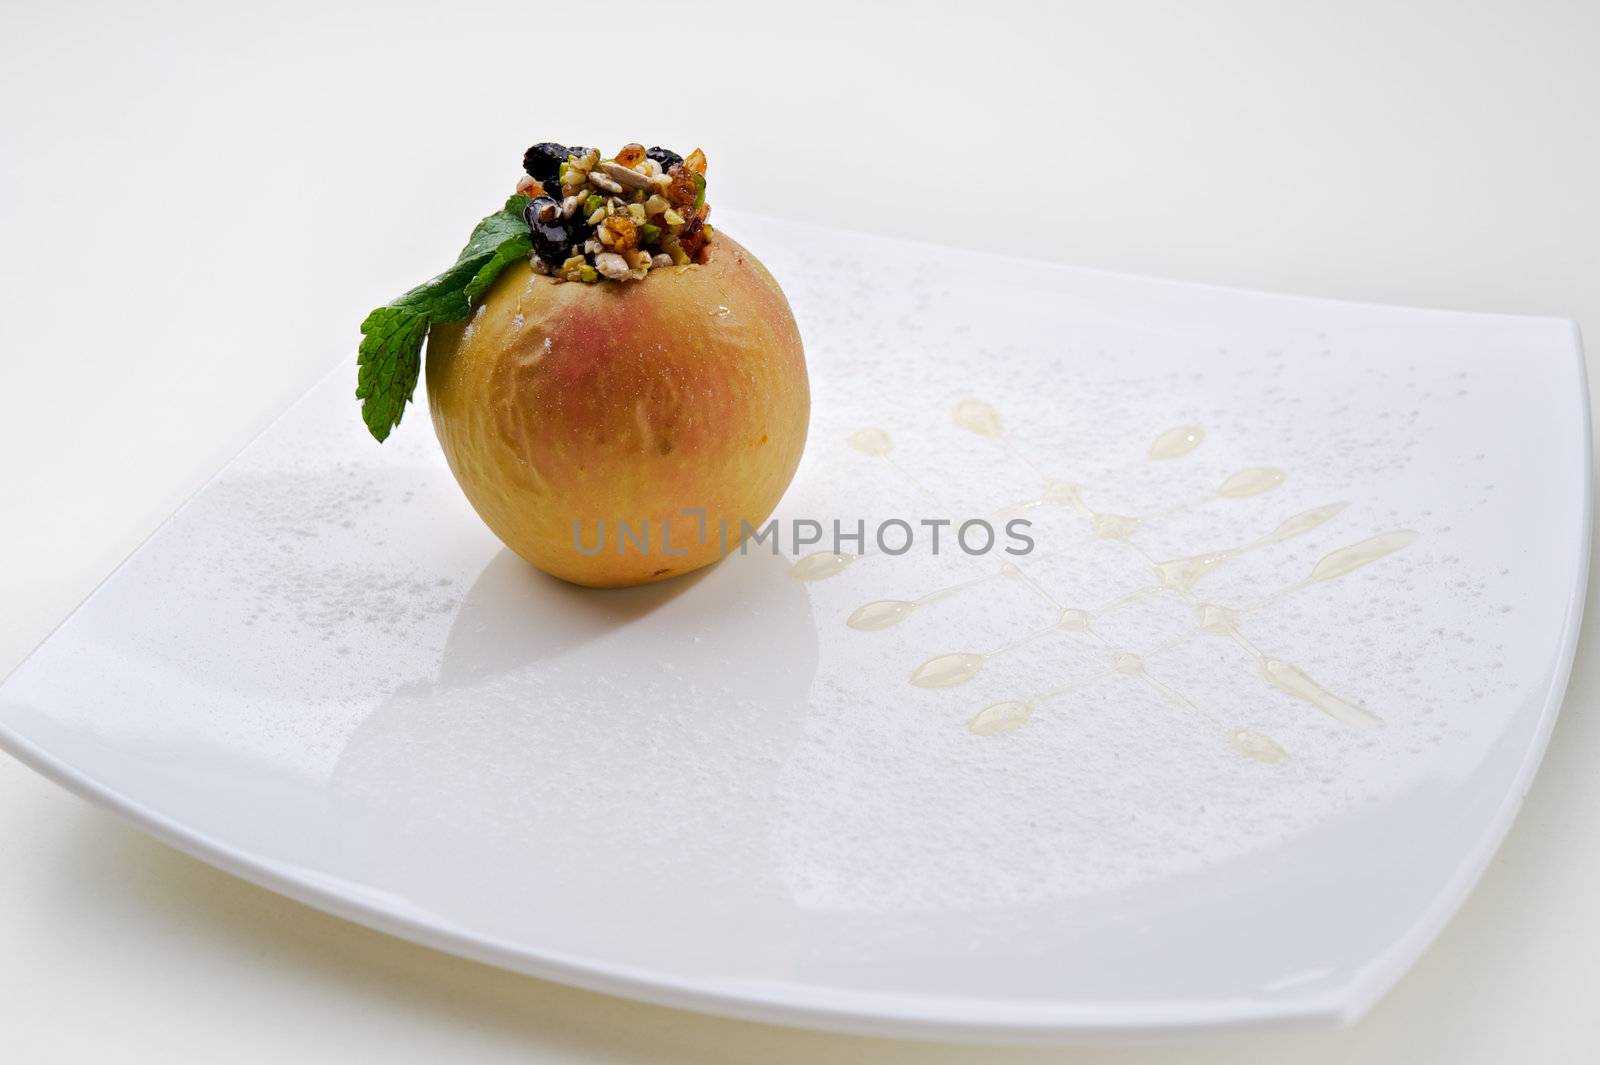 Foie gras with apple served on white plate